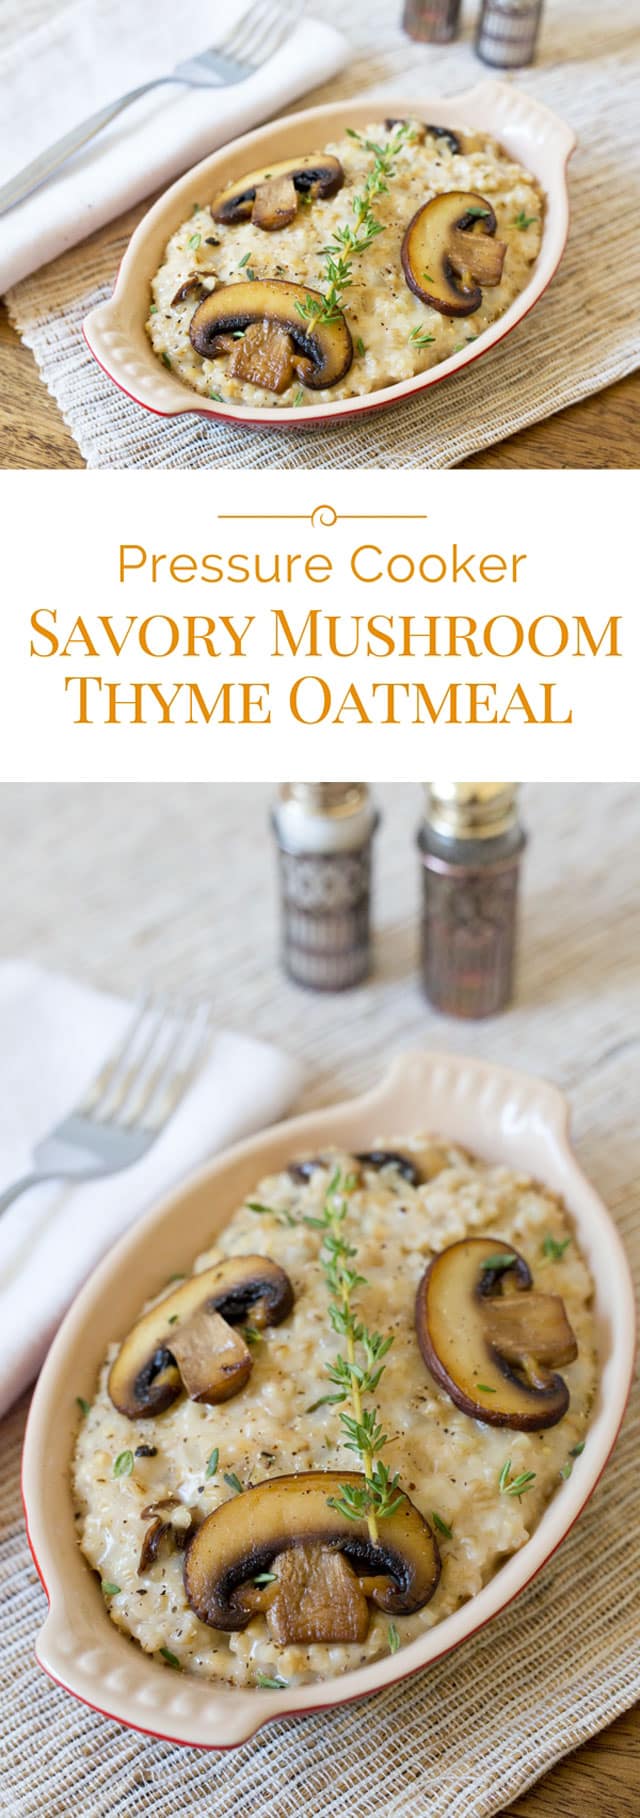 Savory Mushroom Thyme Oatmeal is a creamy, cheesy, decadently delicious dish. If you love risotto, you're going to go crazy for this Insta Pot pressure cooker oatmeal recipe. #pressurecooker #instantpot #sidedishrecipe via @PressureCook2da